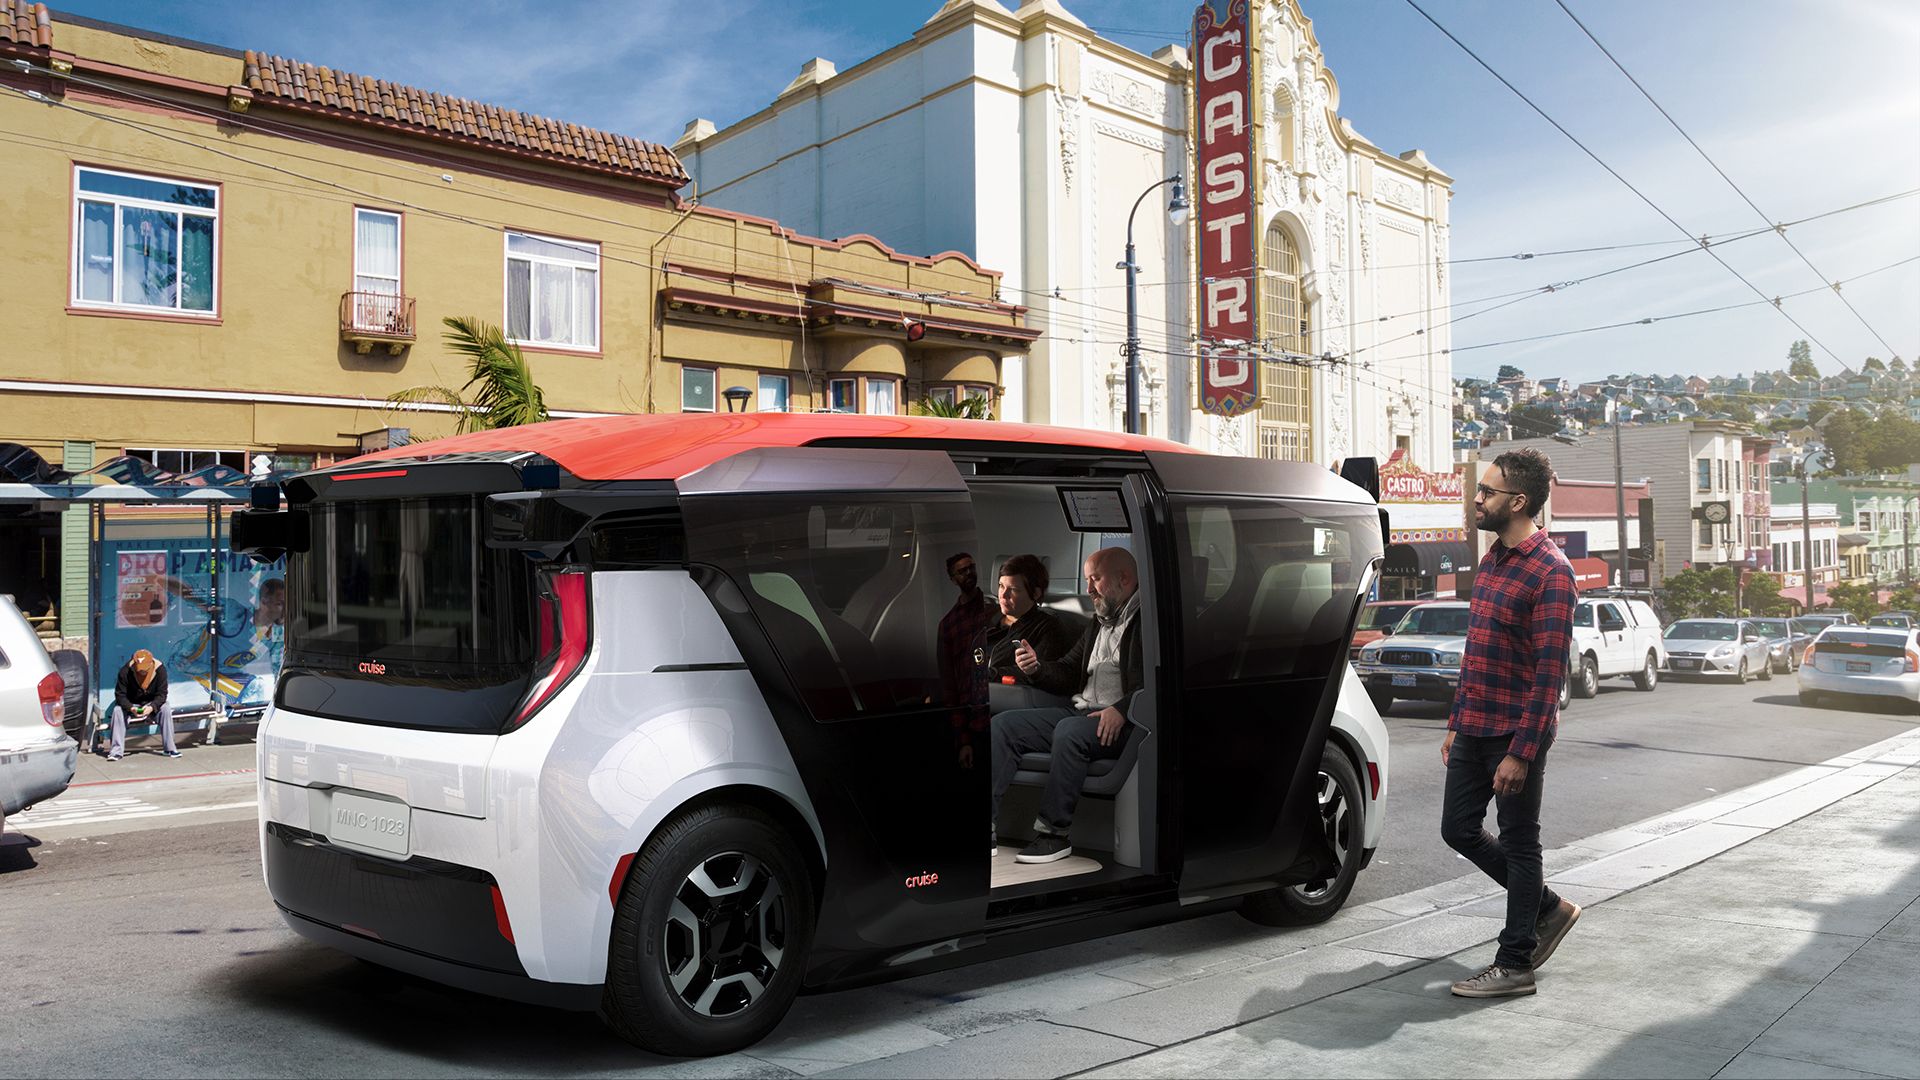 Image of Cruise Origin, a boxy, 6-passenger, self-driving electric vehicle for ride-sharing.